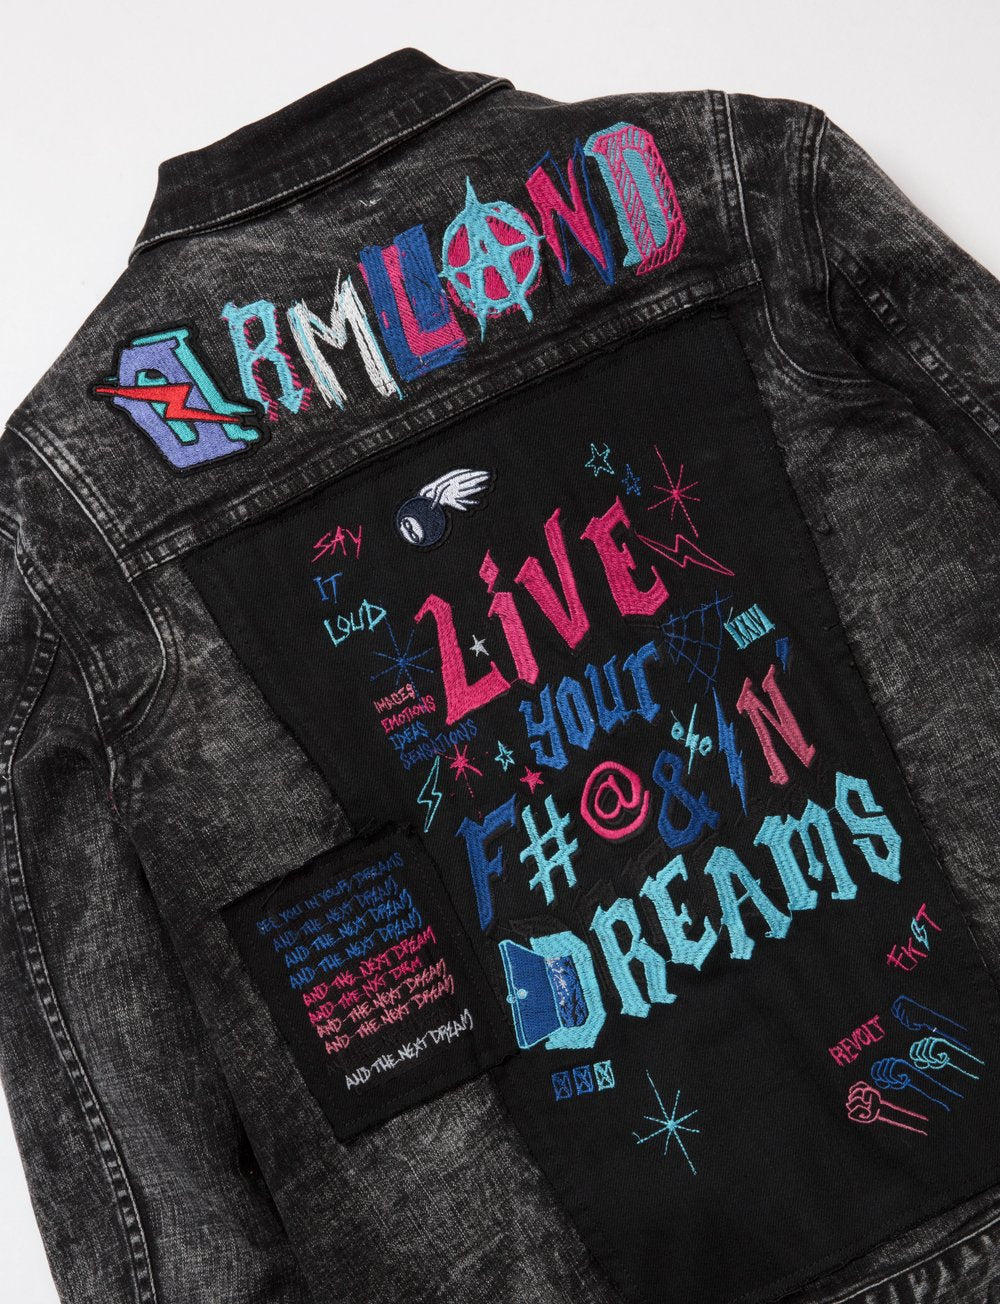 Dreamland-Disobedient Jean Jacket-D2002O0226